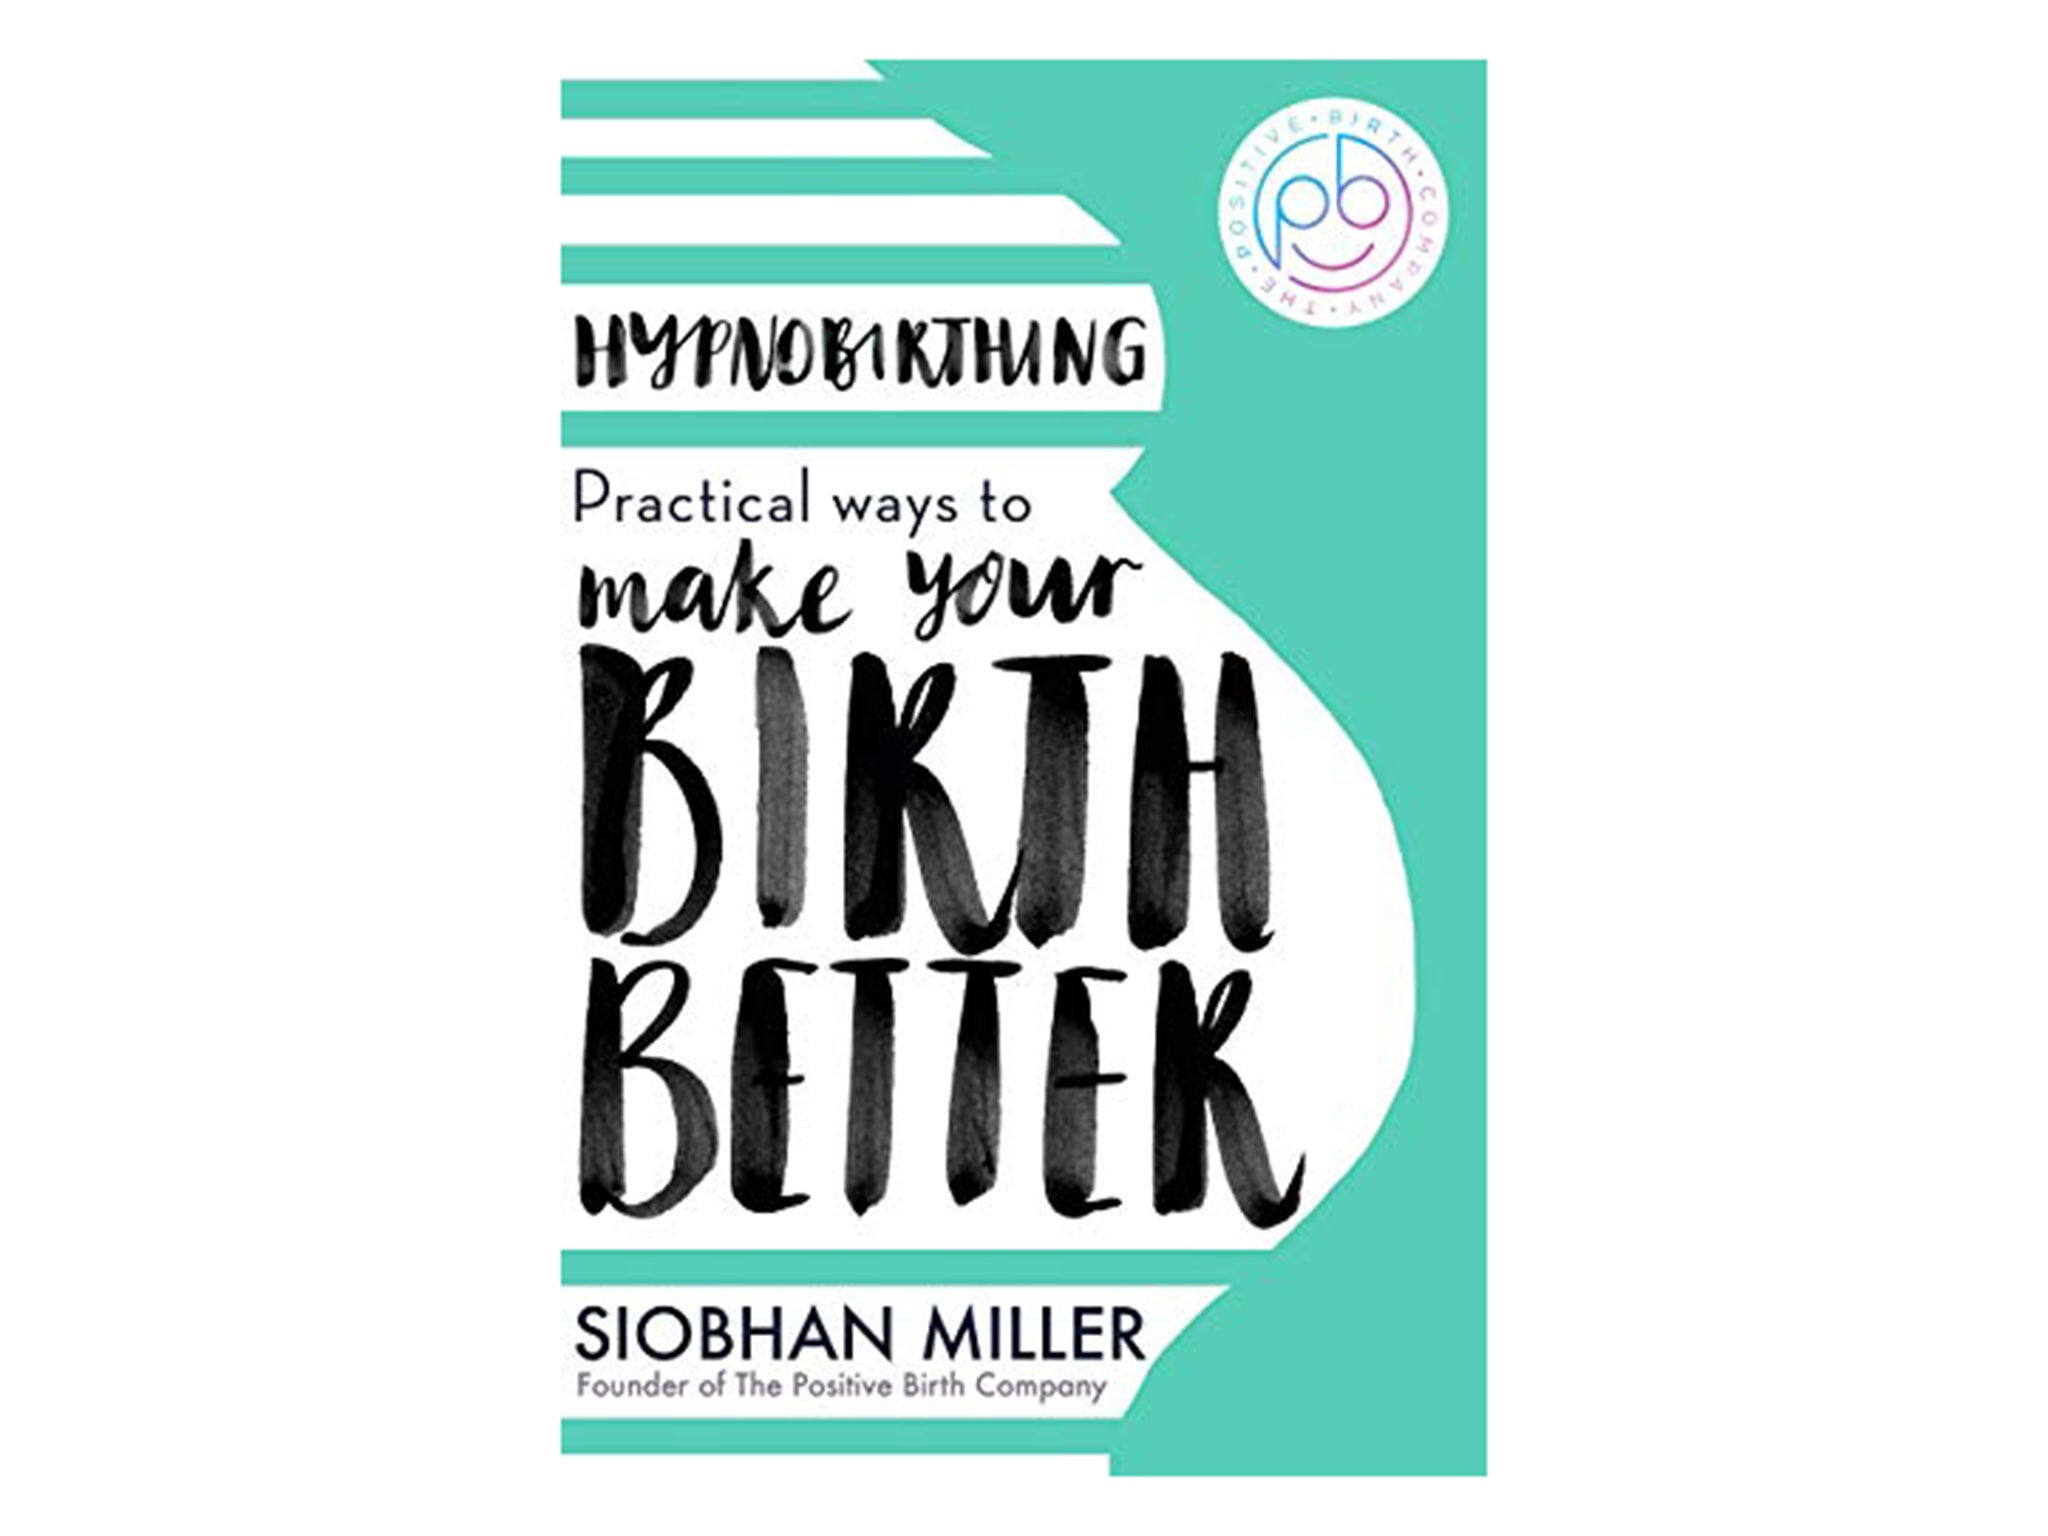 Hypnobirthing Practical Ways to Make Your Birth Better by Siobhan Miller. Published by Piatkus £10.41, Amazon.jpg